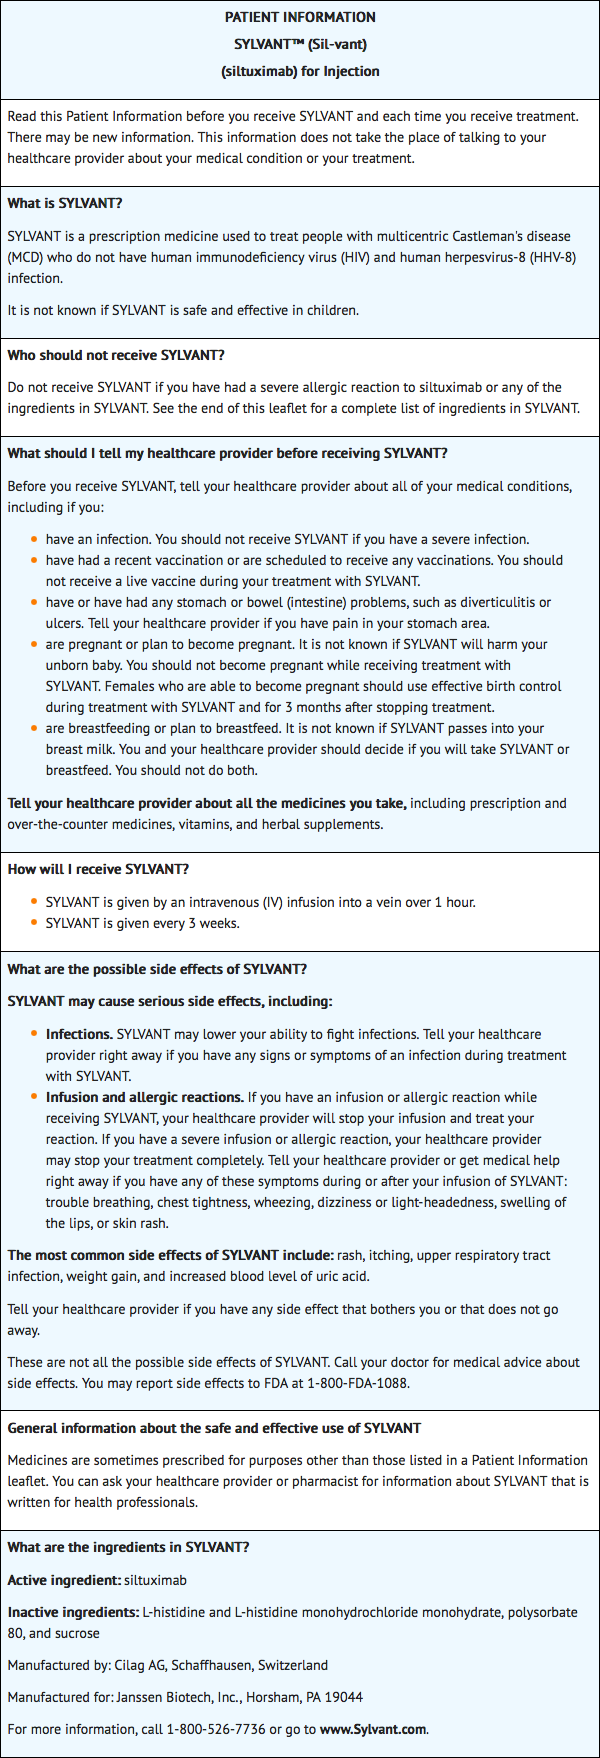 File:Patient Package Insert Siltuximab.png